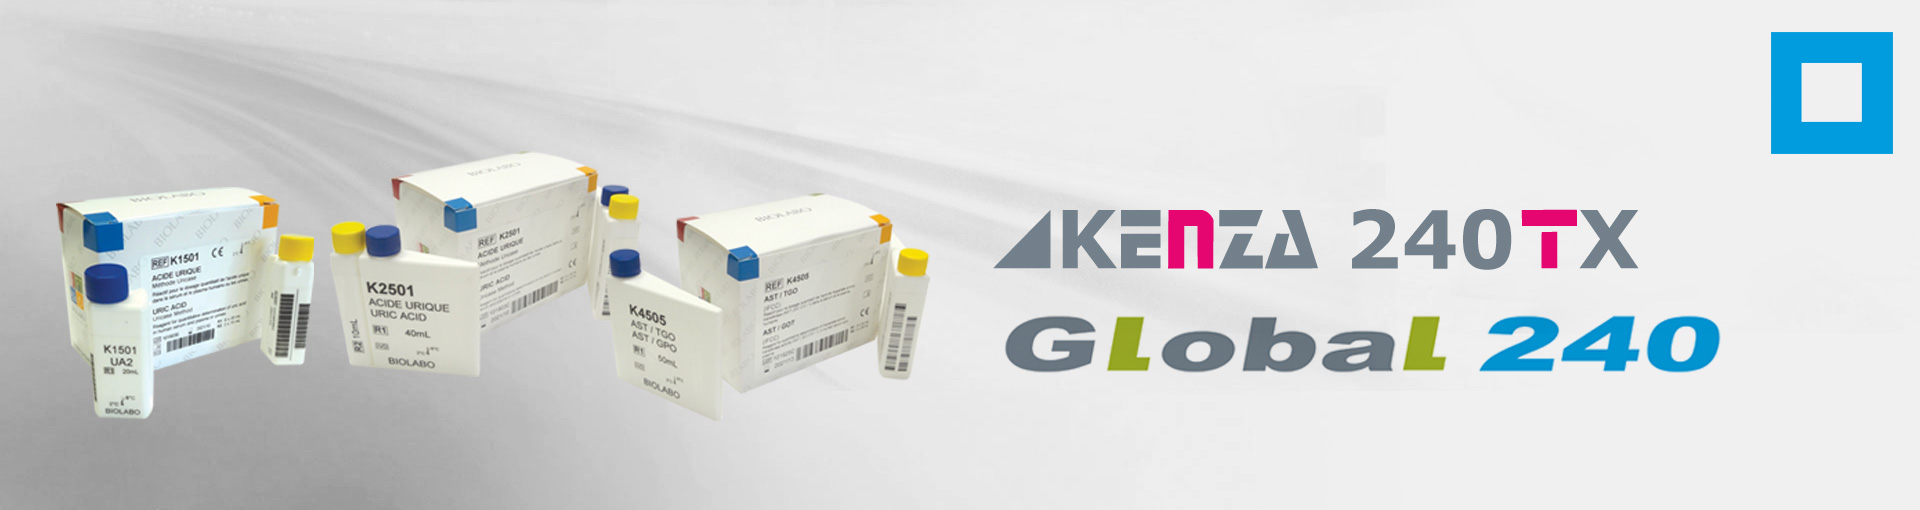 Biochemistry reagents dedicated to KENZA 240 TX and GLOBAL 240